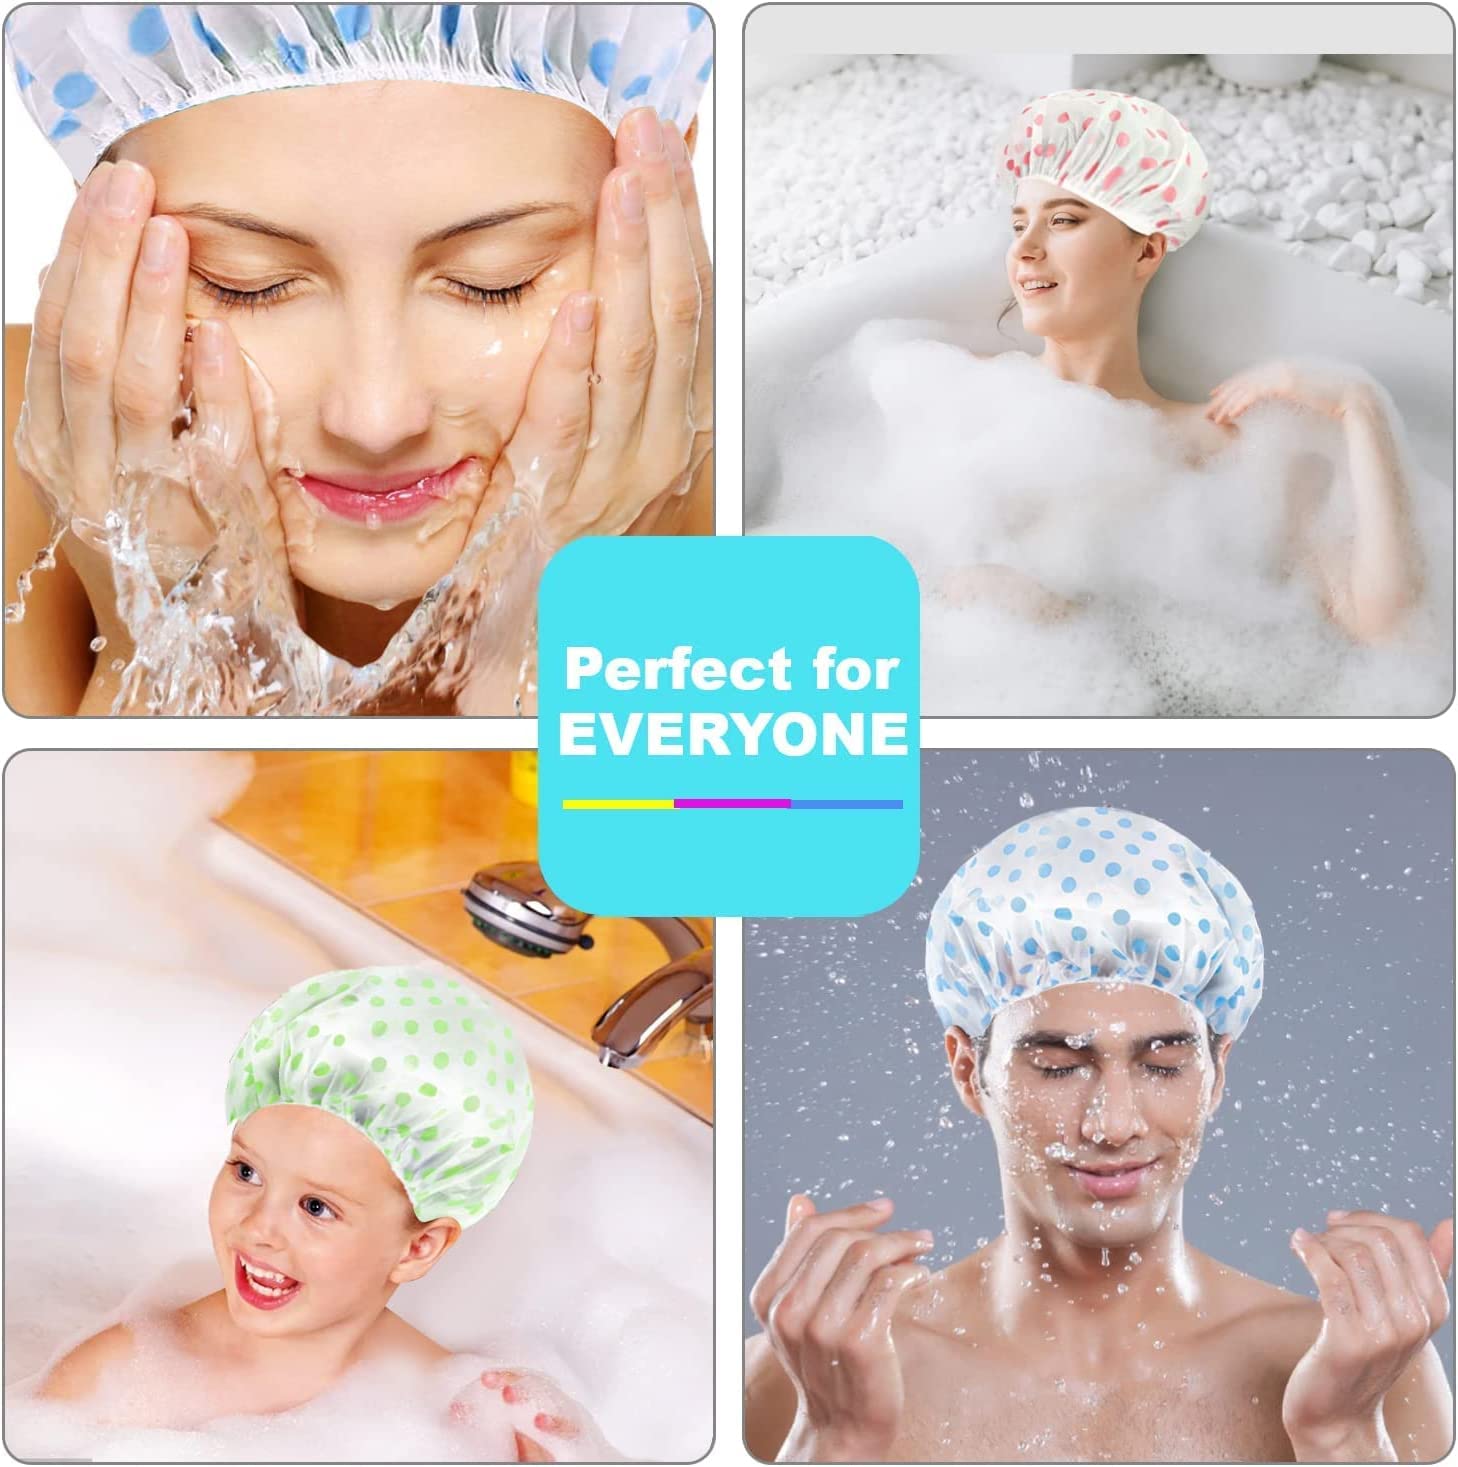 MZD8391 Shower Cap, Reusable Shower Hat Bath Caps - Waterproof with Elastic Band Hair Hat for Men Women Ladies Spa Salon (Coloful Dotted) (3 Packs)